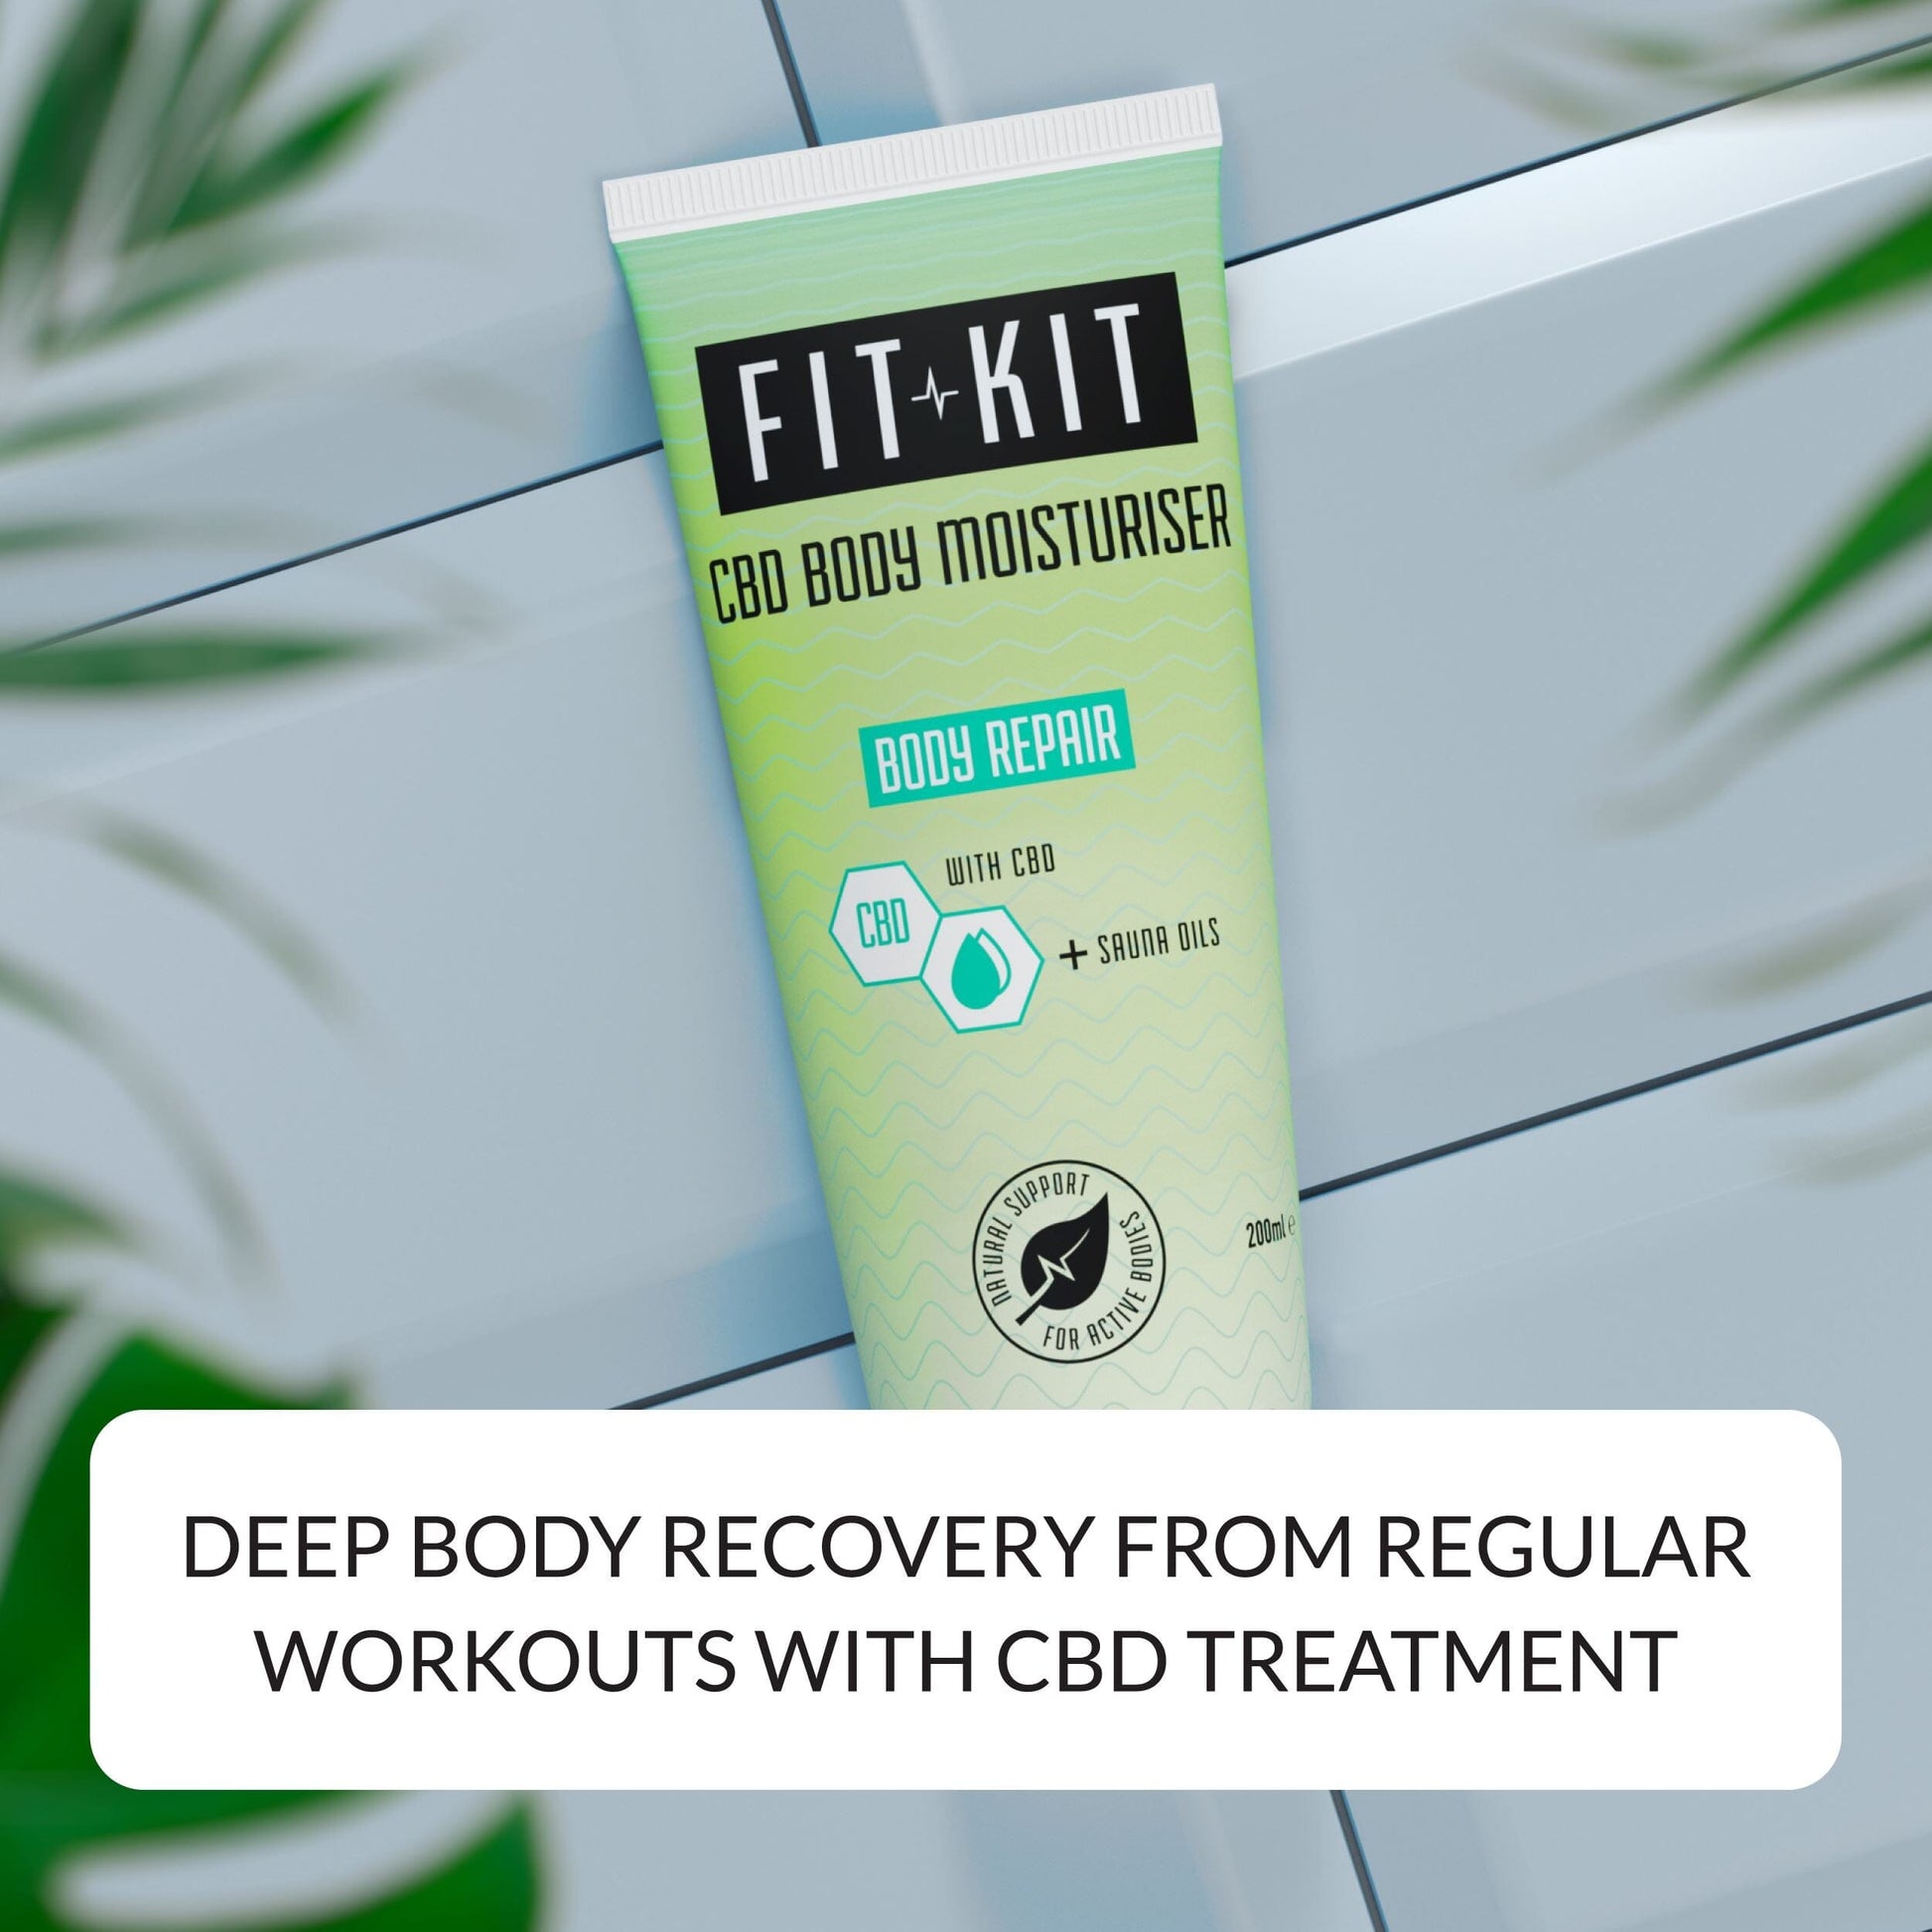 Post Exercise Recovery Kit V4 Health & Beauty Fit Kit Bodycare 